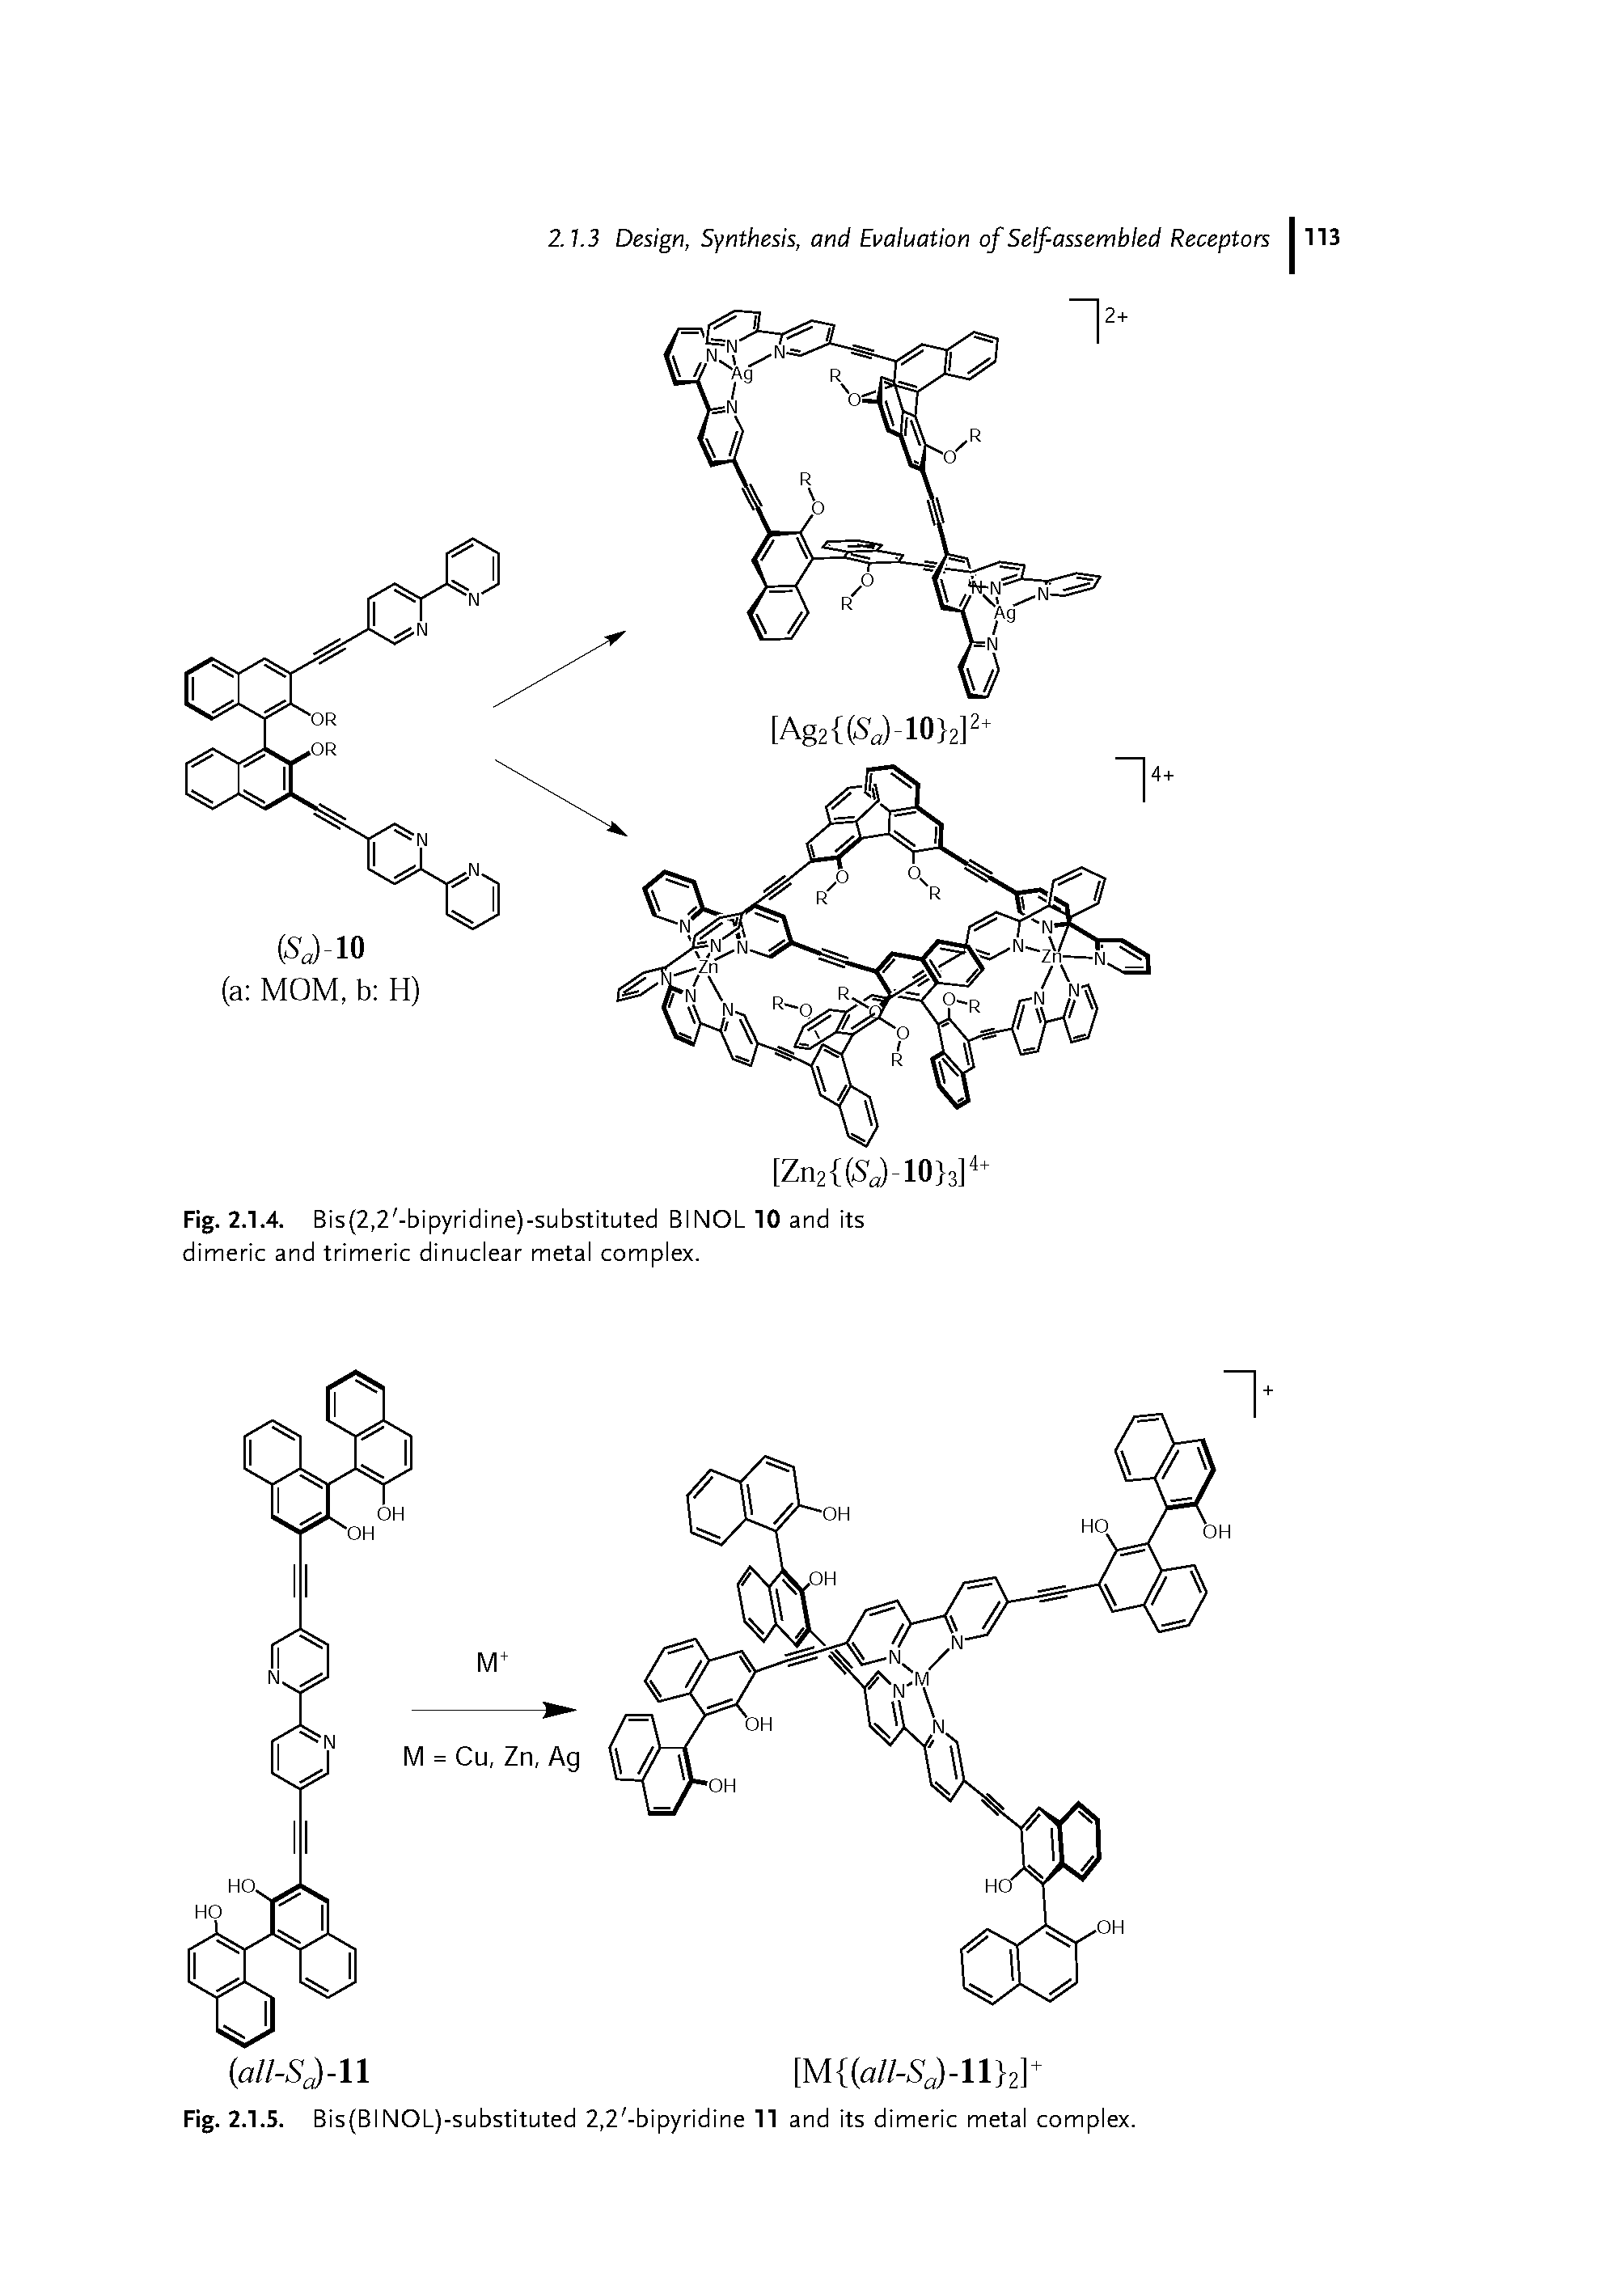 Fig. 2.1.4. Bis(2,2 -bipyridine)-substituted BINOL 10 and its dimeric and trimeric dinuclear metal complex.